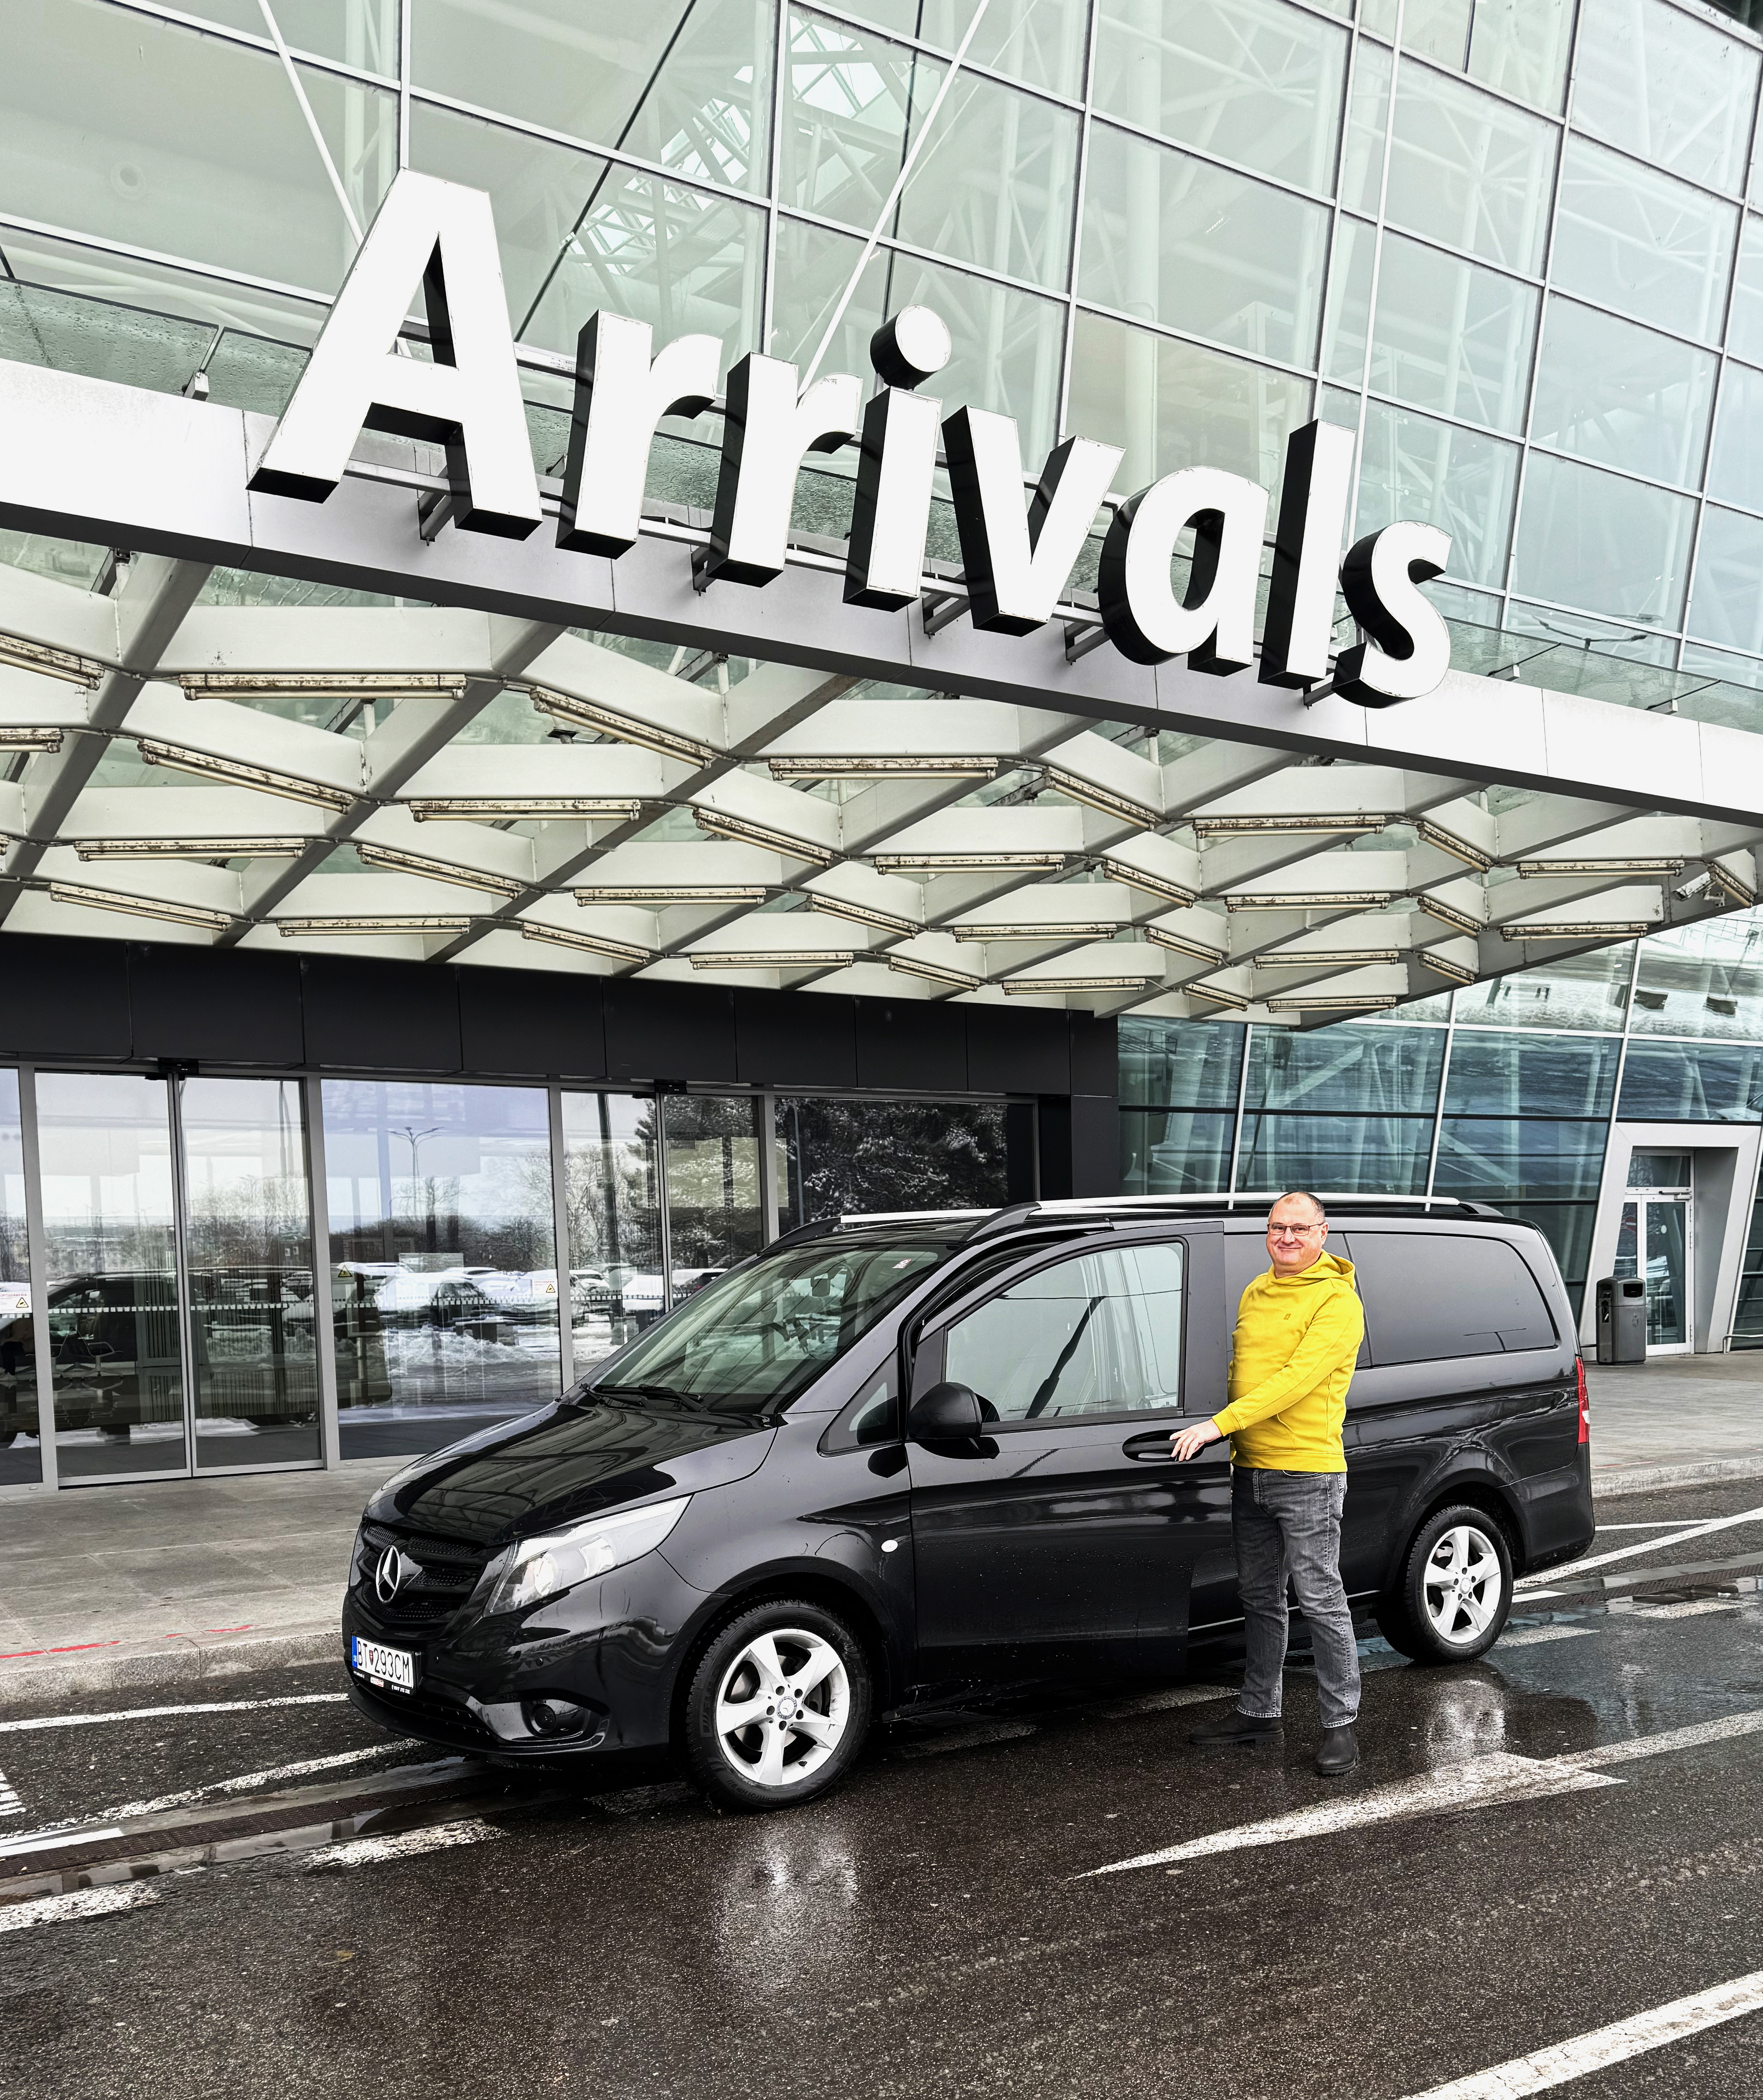 Brno Airport Meet and Greet service with Driver